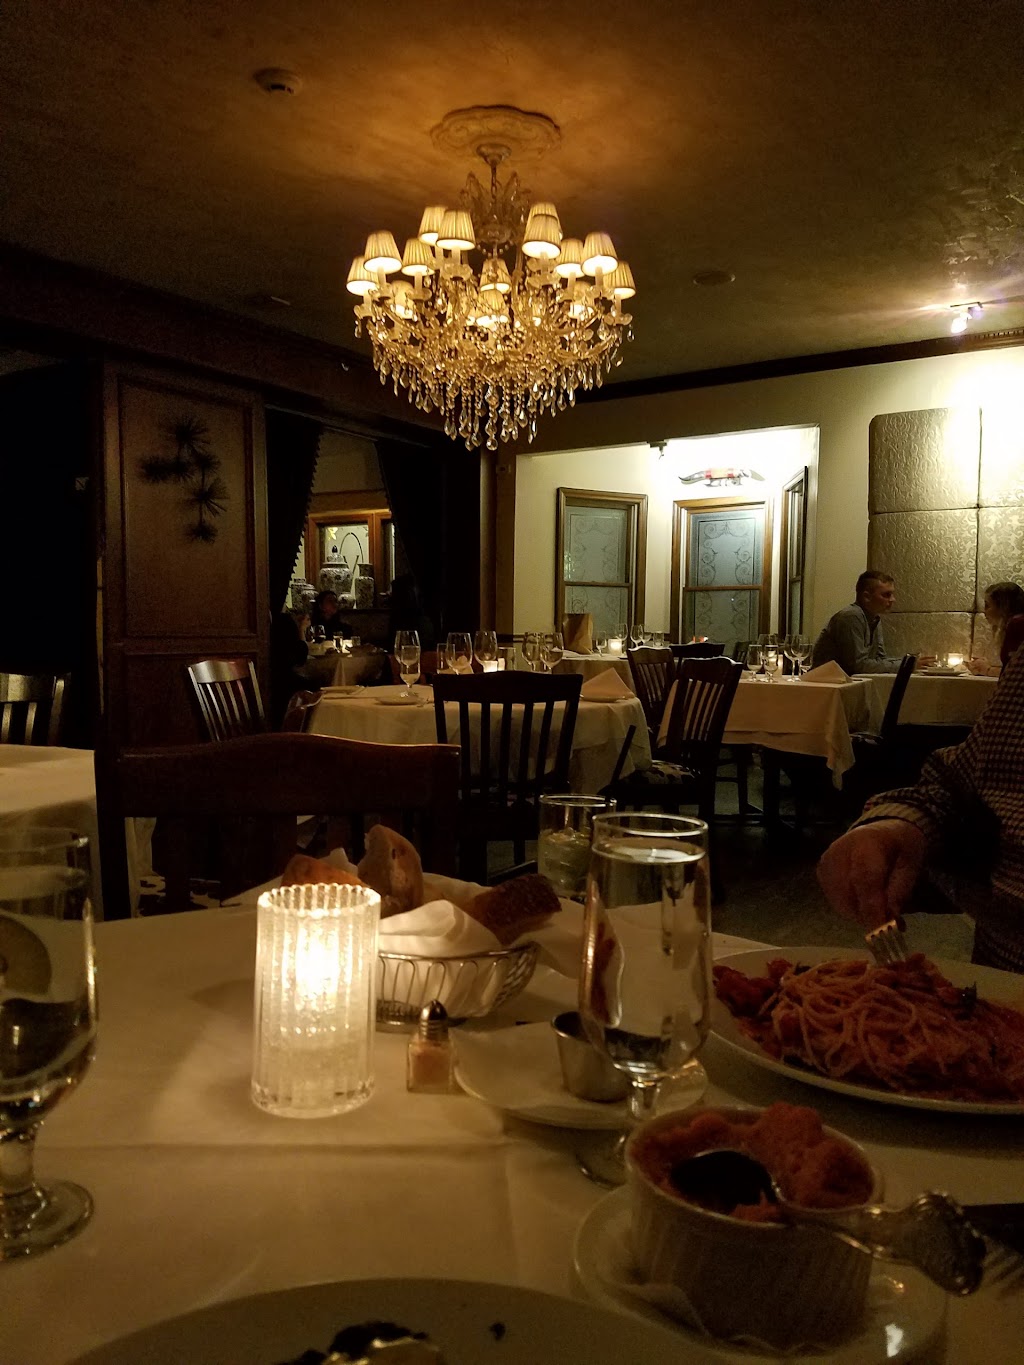 Vintage Steak House | 433 N Country Rd, St James, NY 11780 | Phone: (631) 862-6440